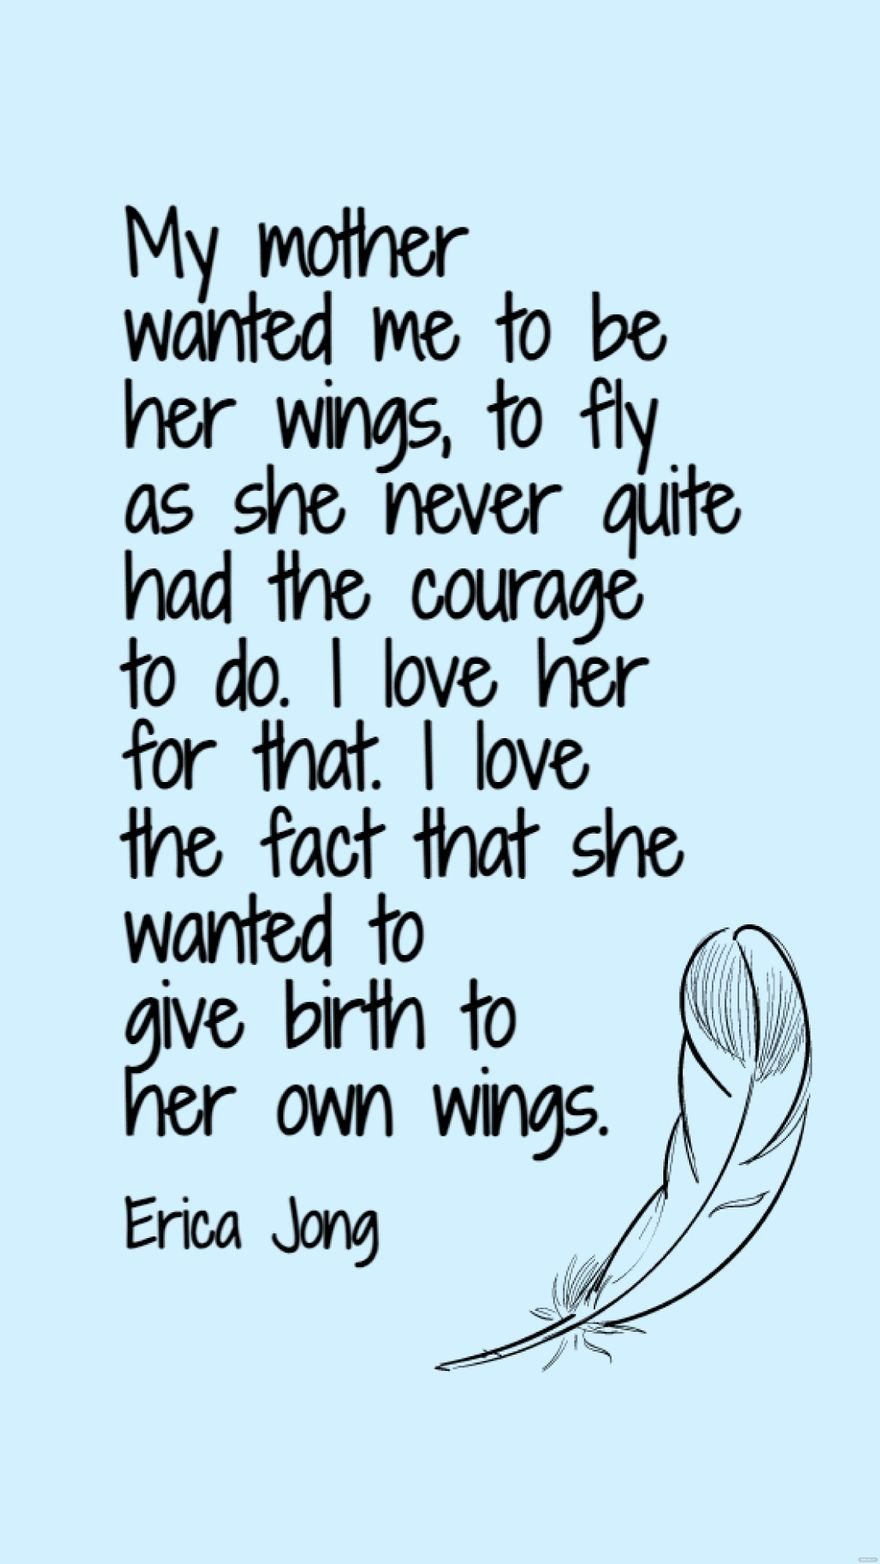 Erica Jong - My mother wanted me to be her wings, to fly as she never quite had the courage to do. I love her for that. I love the fact that she wanted to give birth to her own wings.